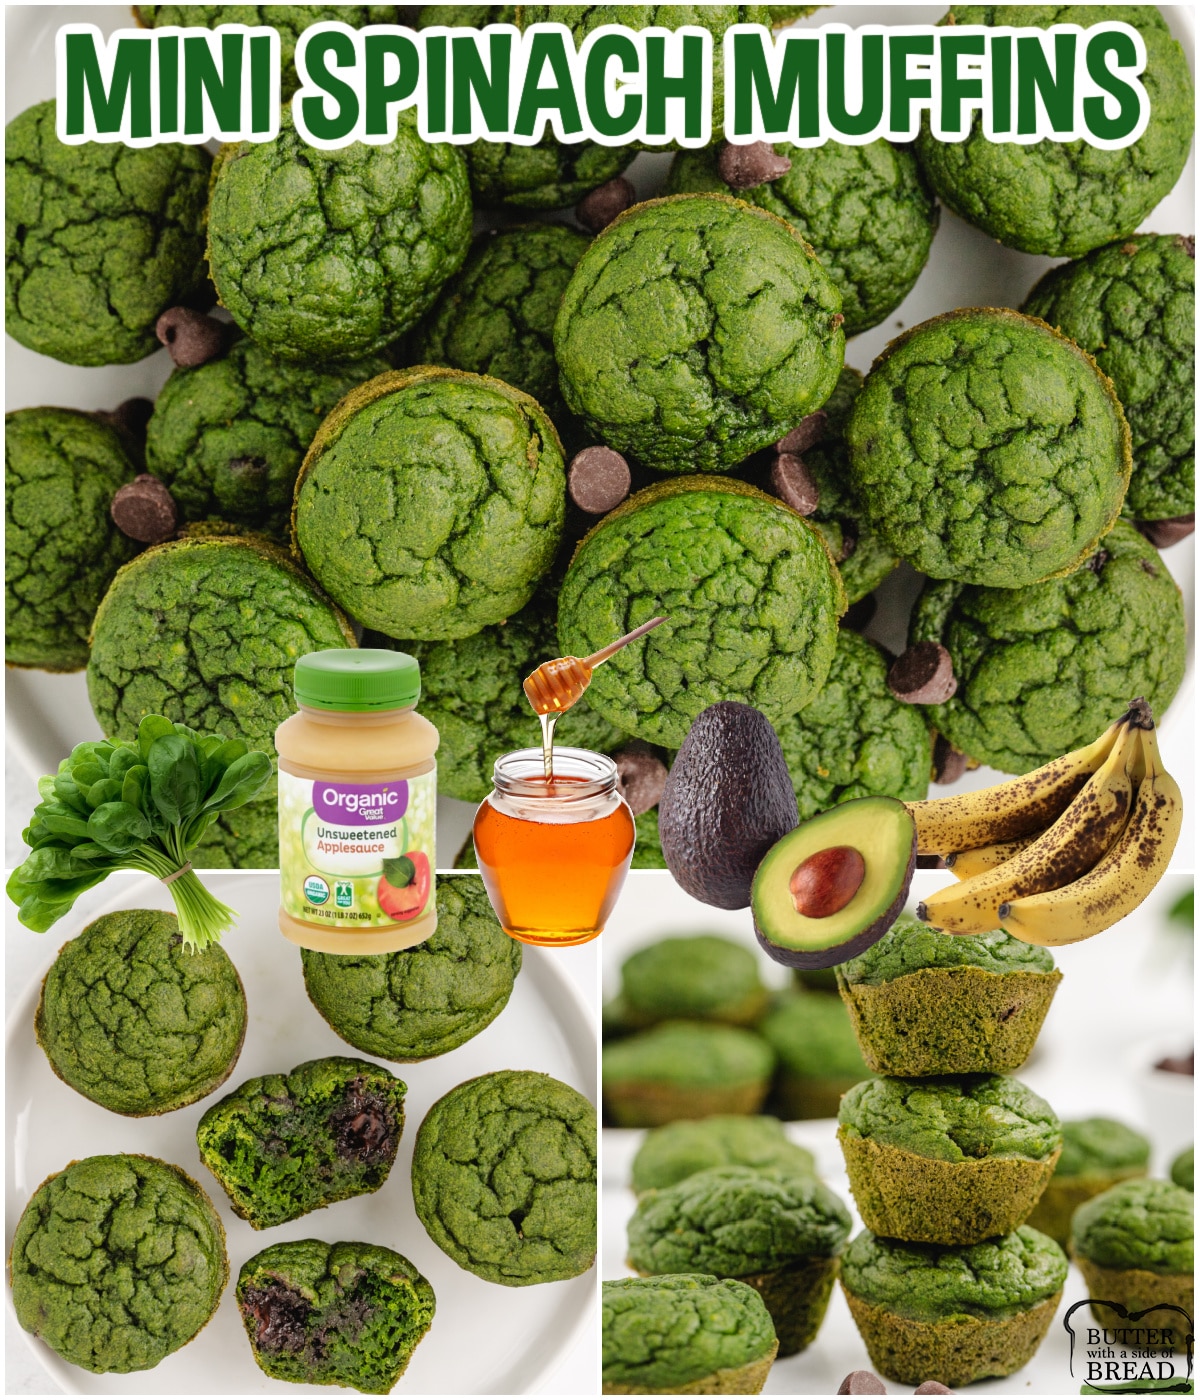 Mini Spinach Muffins are healthy, delicious, and a great way to sneak in some fruits and veggies. Made in a blender with spinach, avocado, apple sauce, honey and bananas, these mini muffins are packed with nutrients. Add a few chocolate chips and your kids will be begging you to make more! 